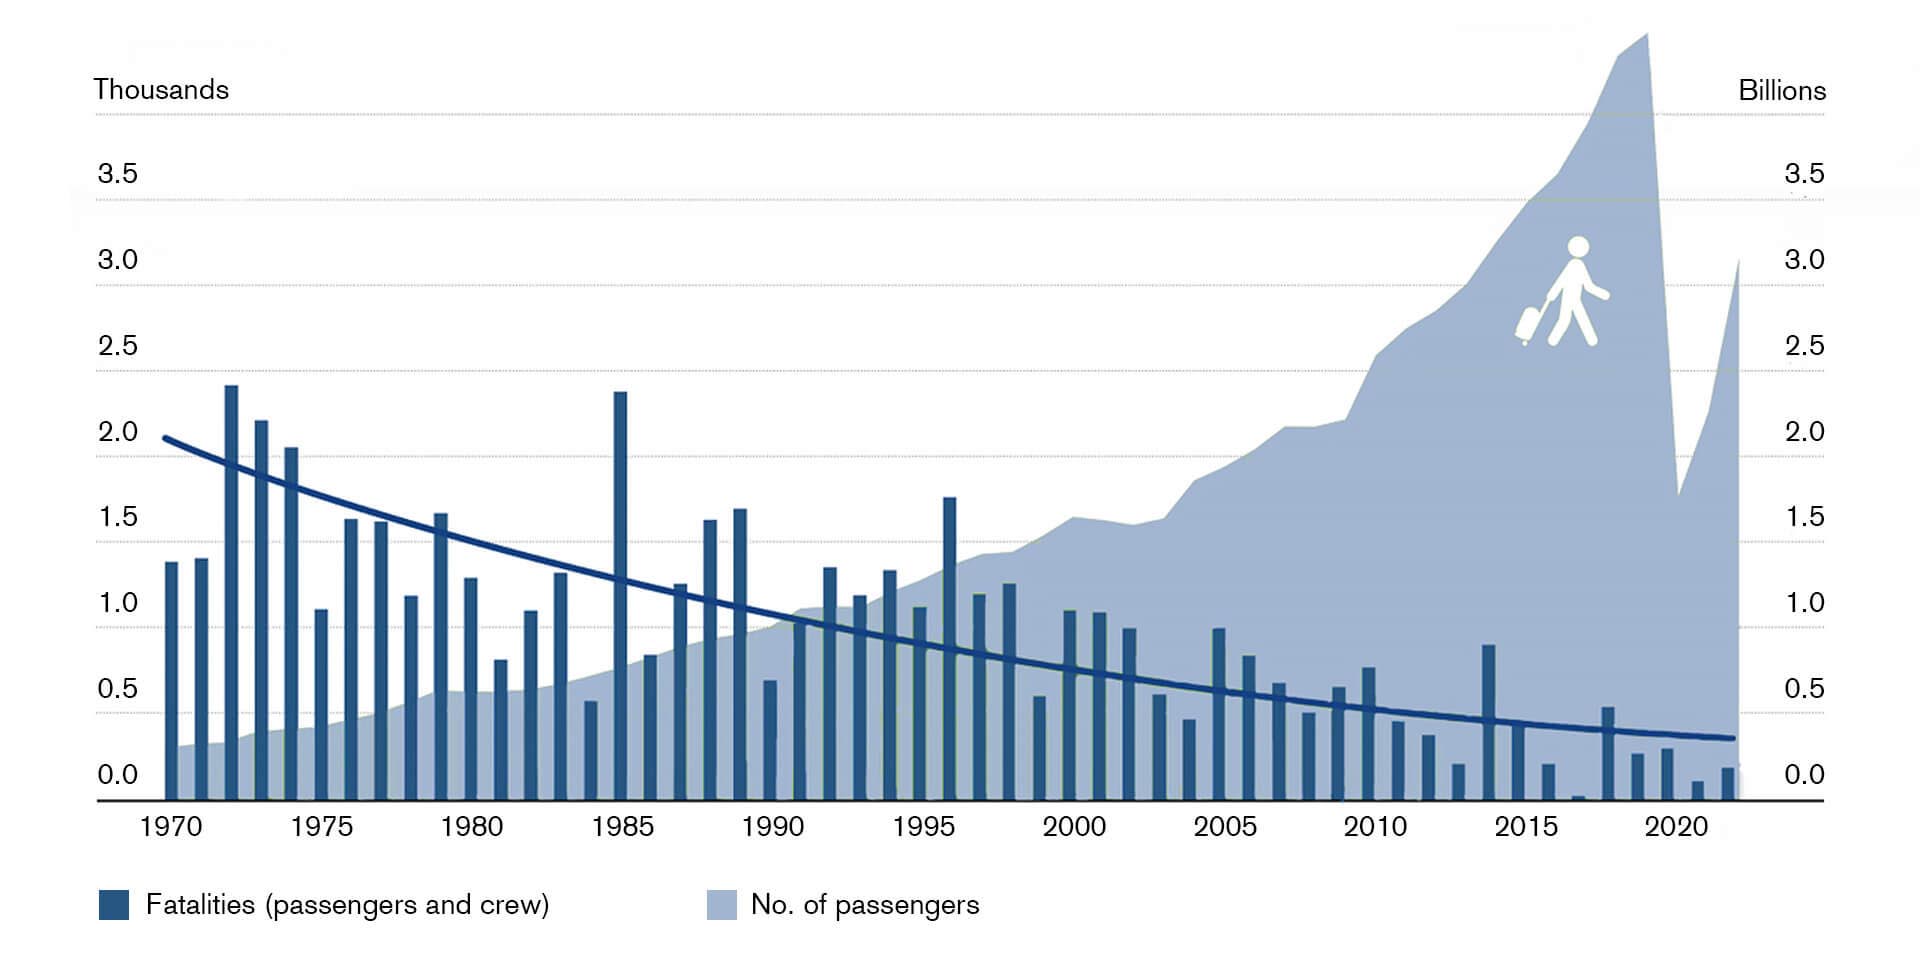 Figure 2 shows that in 2022 the number of passengers was still around eight times higher than in 1970. In the 1970s, the probability of dying in a plane crash averaged around 1:264,000; last year, however, that figure was 1:15,609,756. In other words, statistically speaking, flying was around 59 times safer in 2022 than it was back in the 1970s.